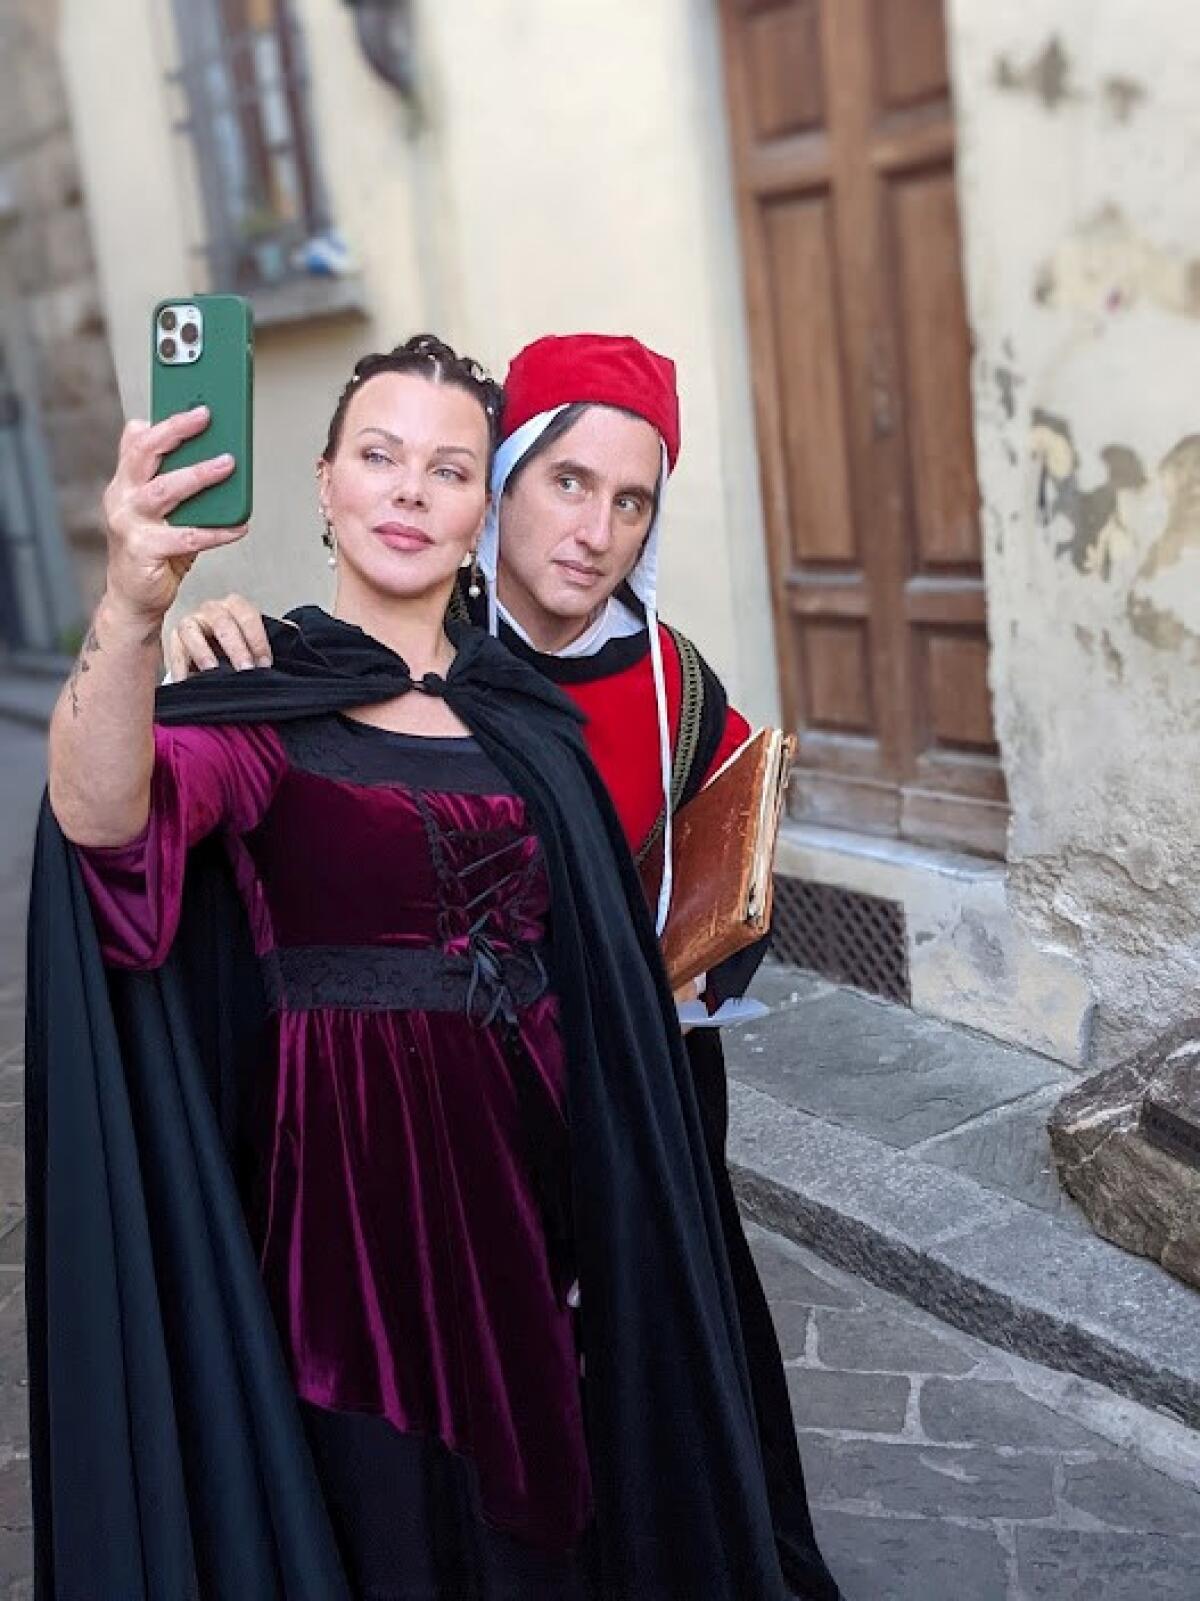 Hershey Felder, right, and actor Debi Mazar filming "Dante and Beatrice in Florence" on the streets of Florence, Italy.